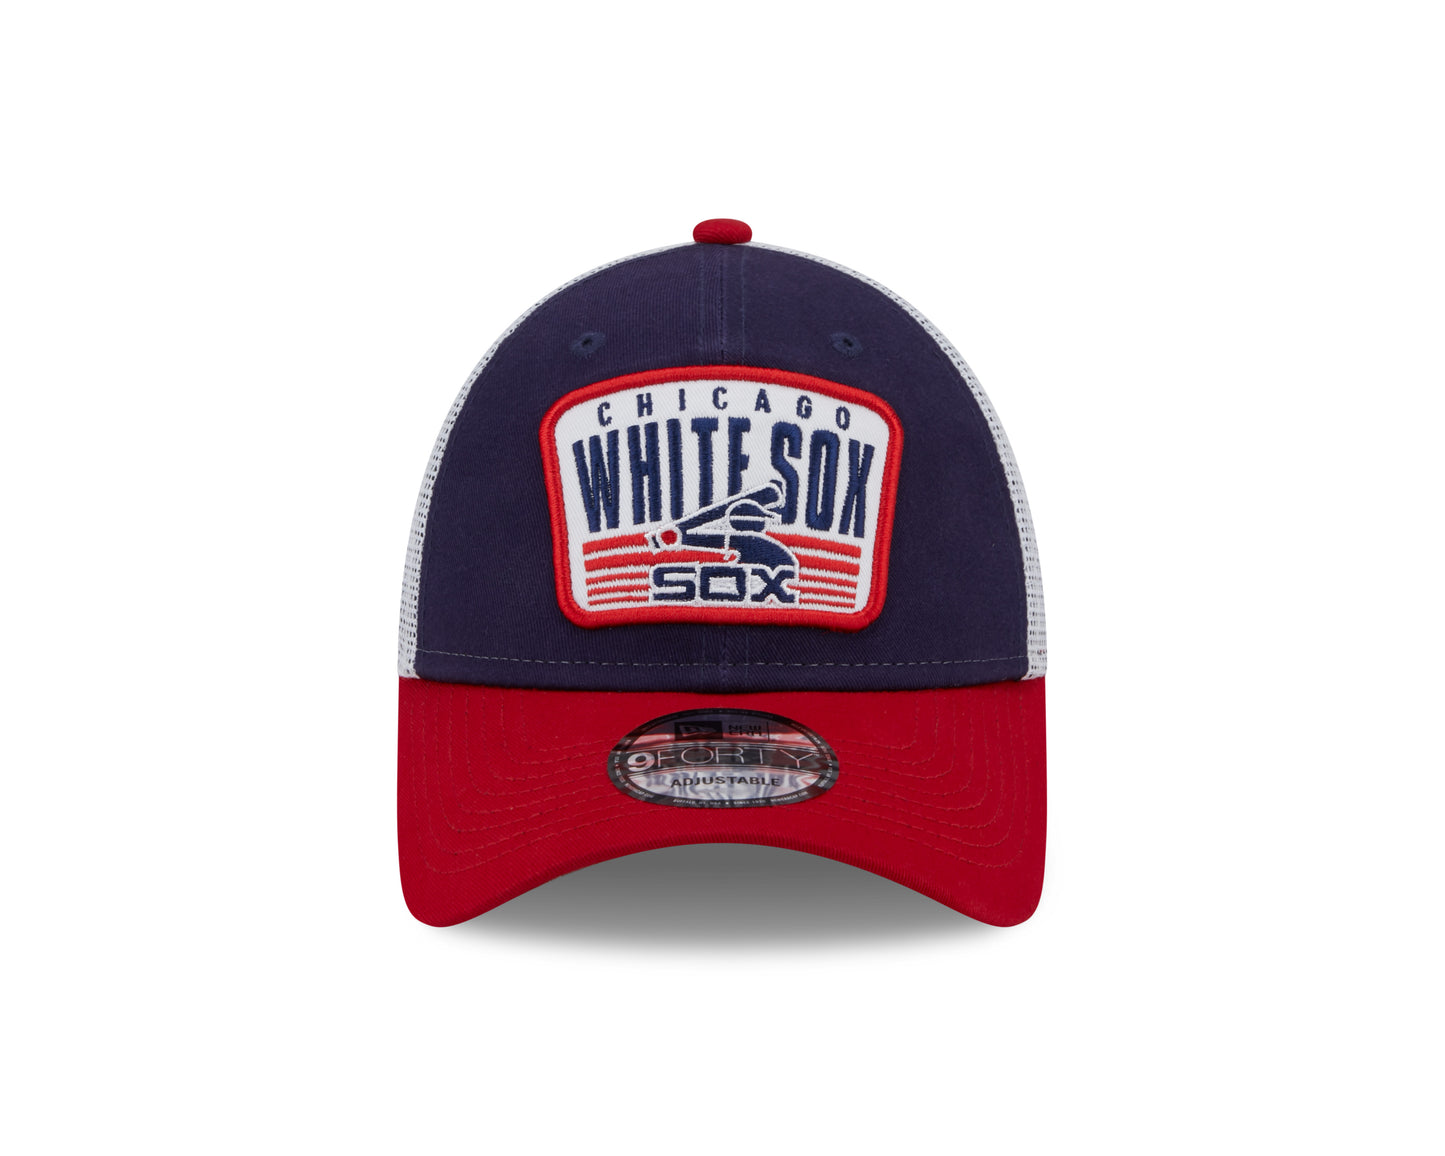 Chicago White Sox New Era 2 Tone Navy/Red Patch Trucker 9FORTY Adjustable Hat